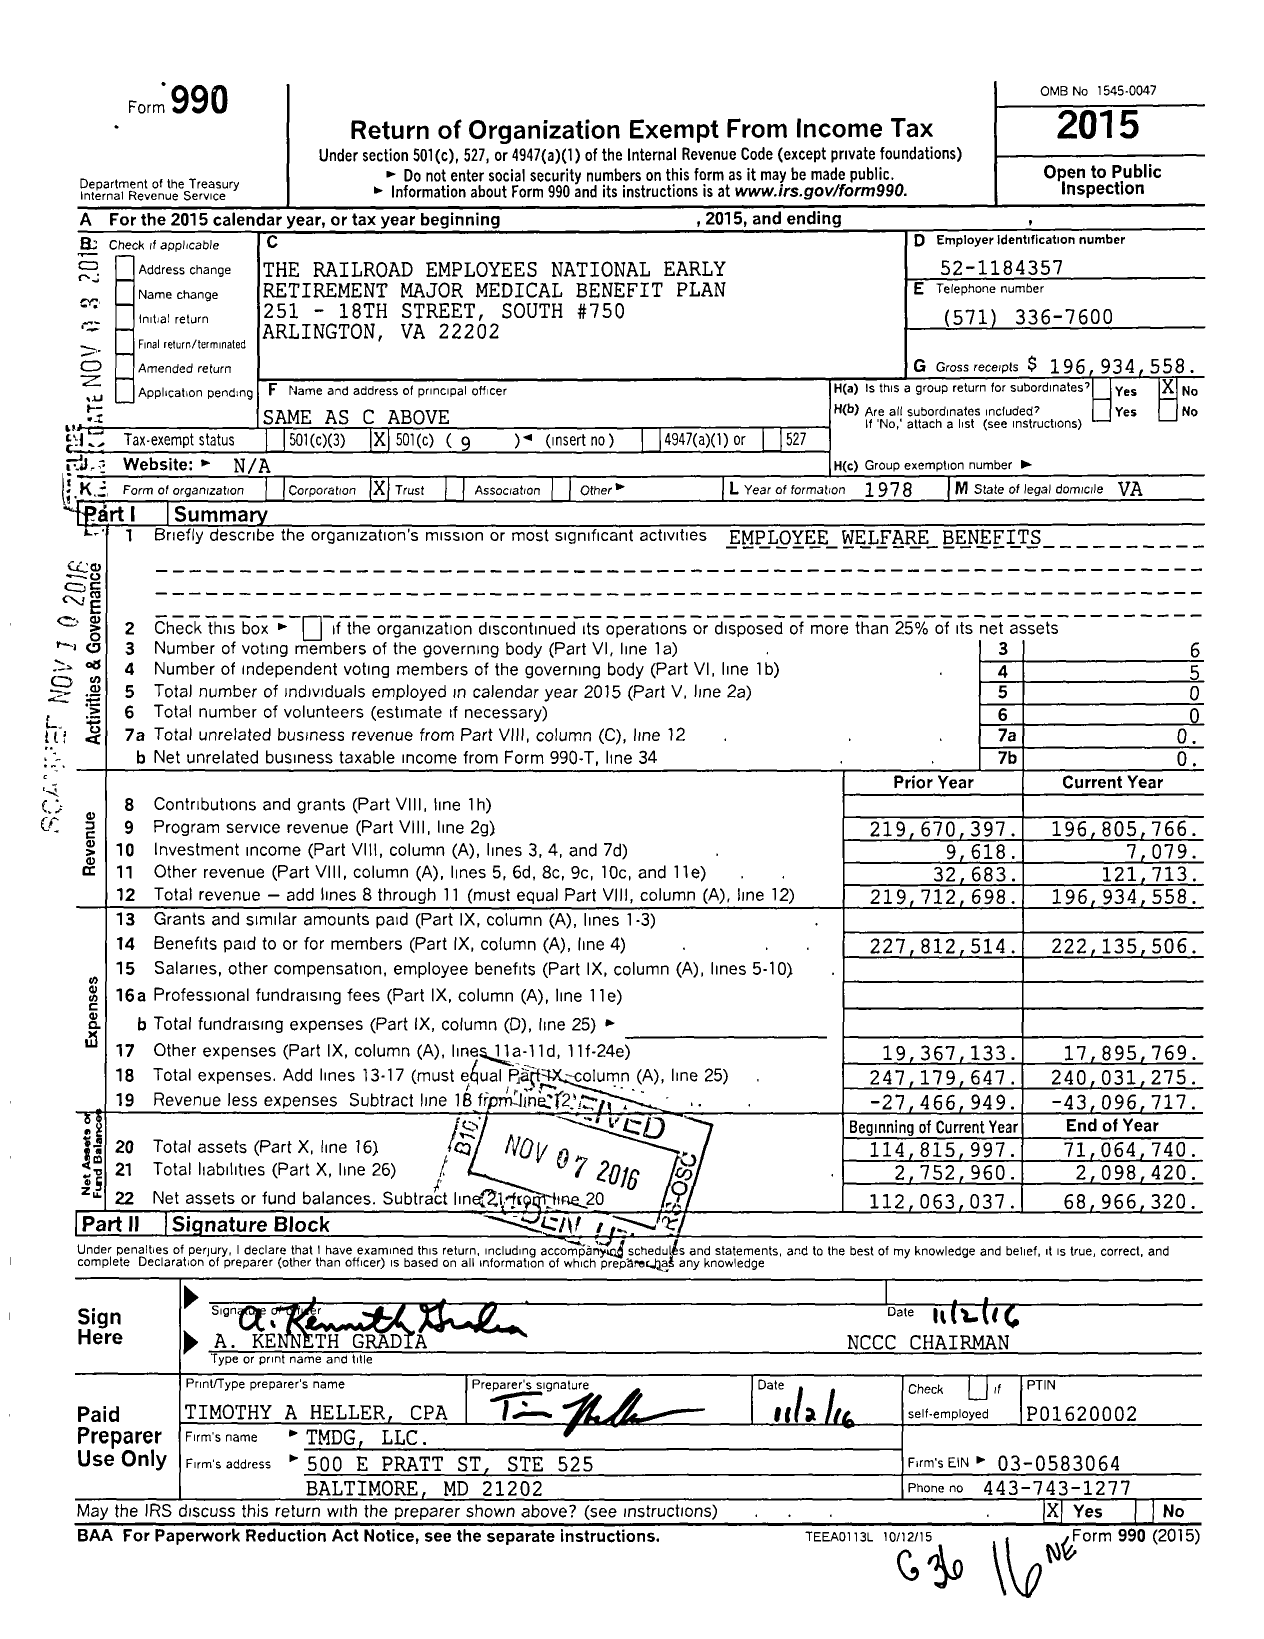 Image of first page of 2015 Form 990O for Railroad Employees National Early Retirement Major Medical Benefit Plan